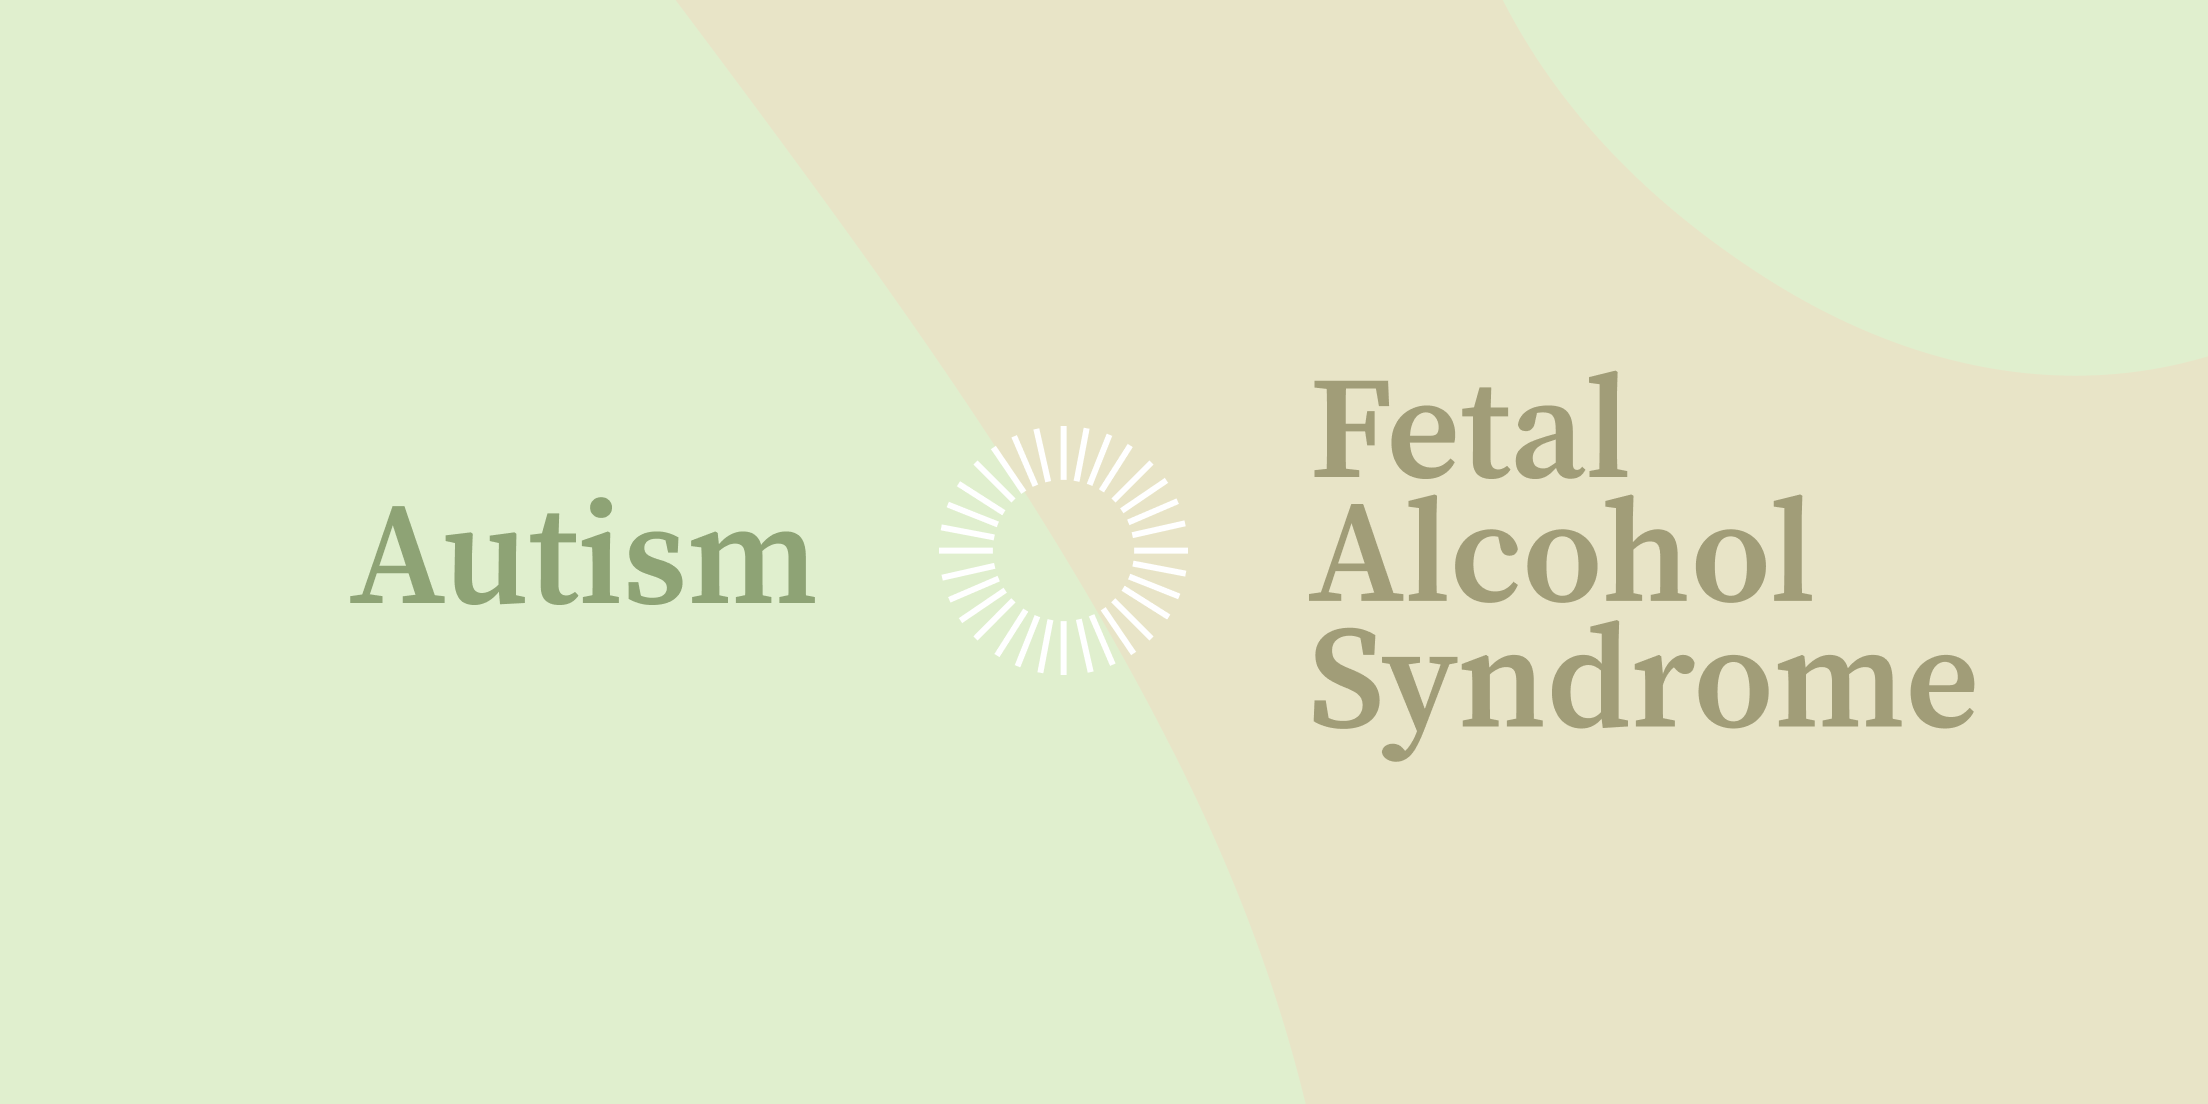 The Connection Between Autism & Fetal Alcohol Syndrome (FAS)